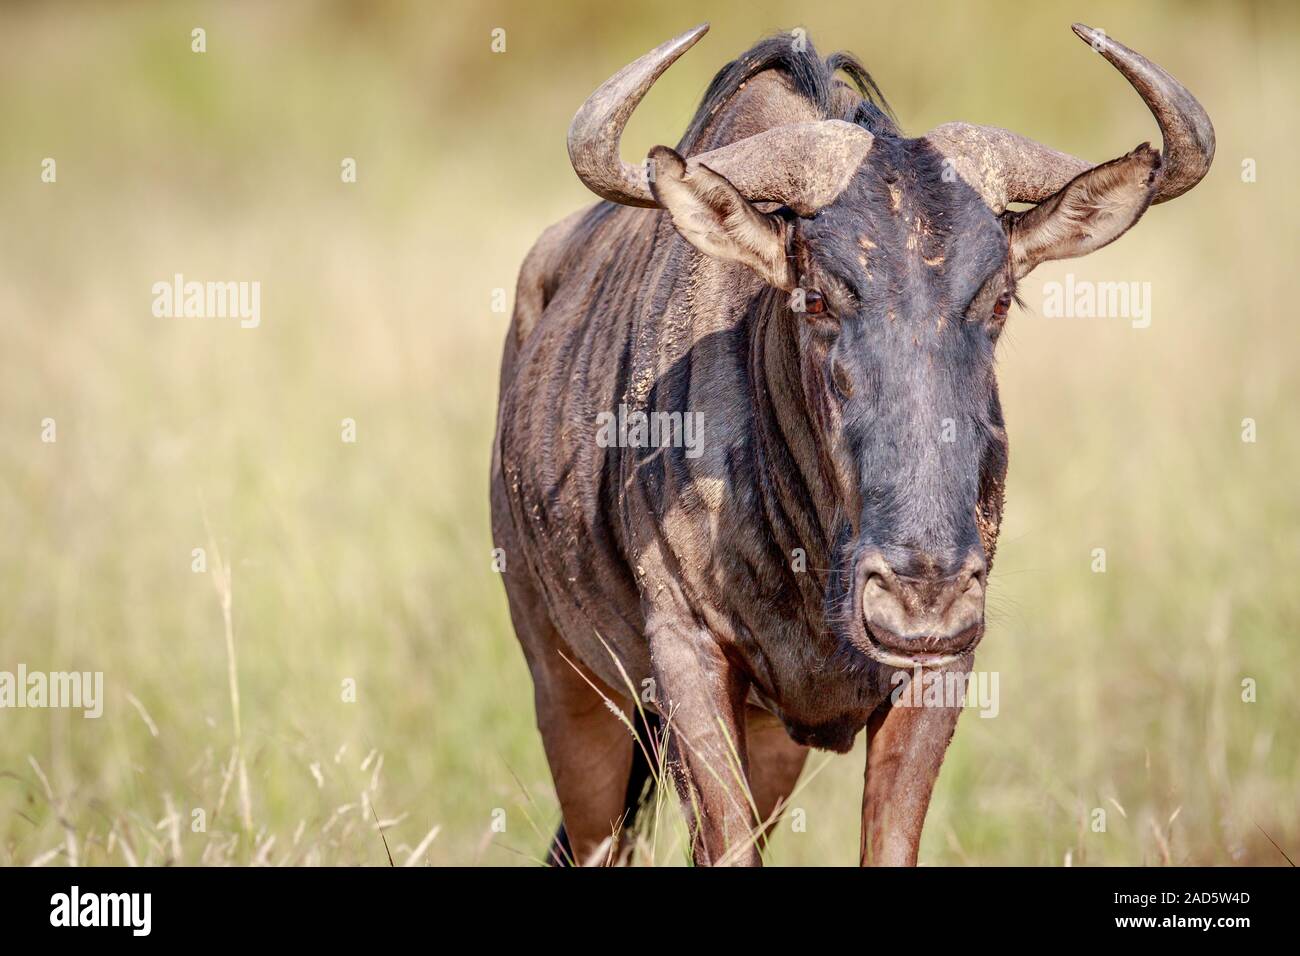 Blue wildebeest starring at the camera. Stock Photo